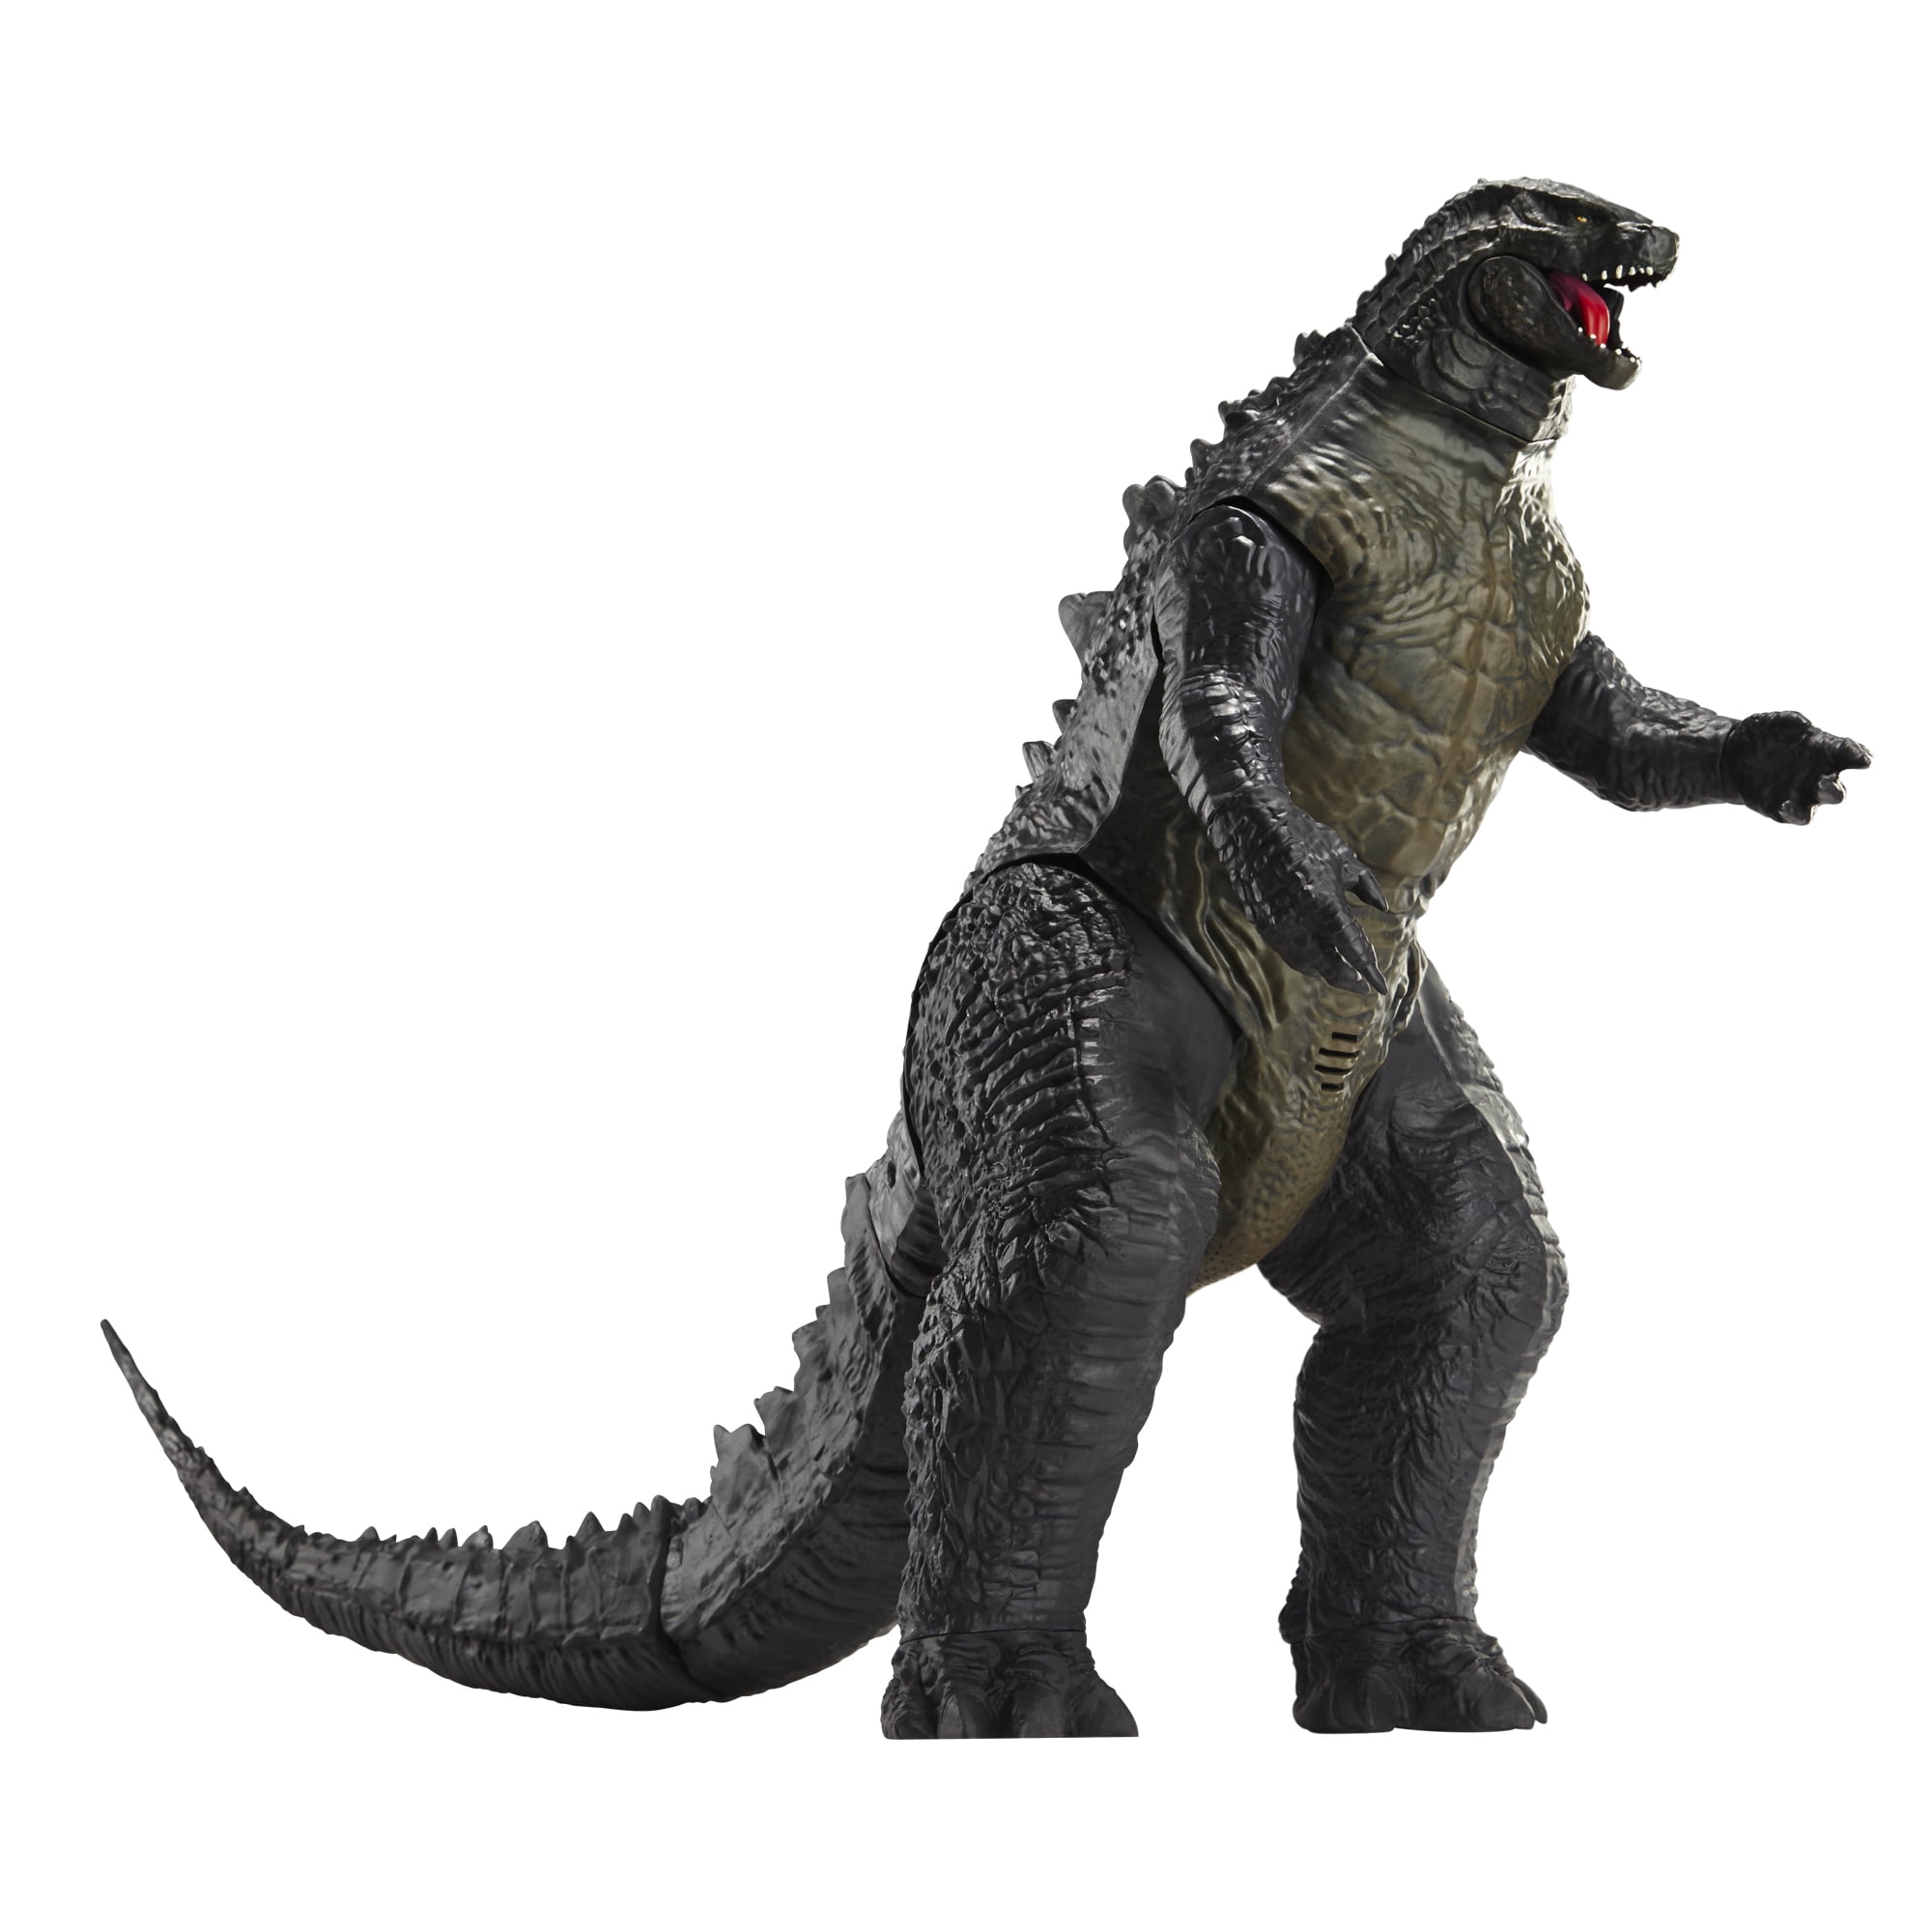 stores that sell godzilla toys near me